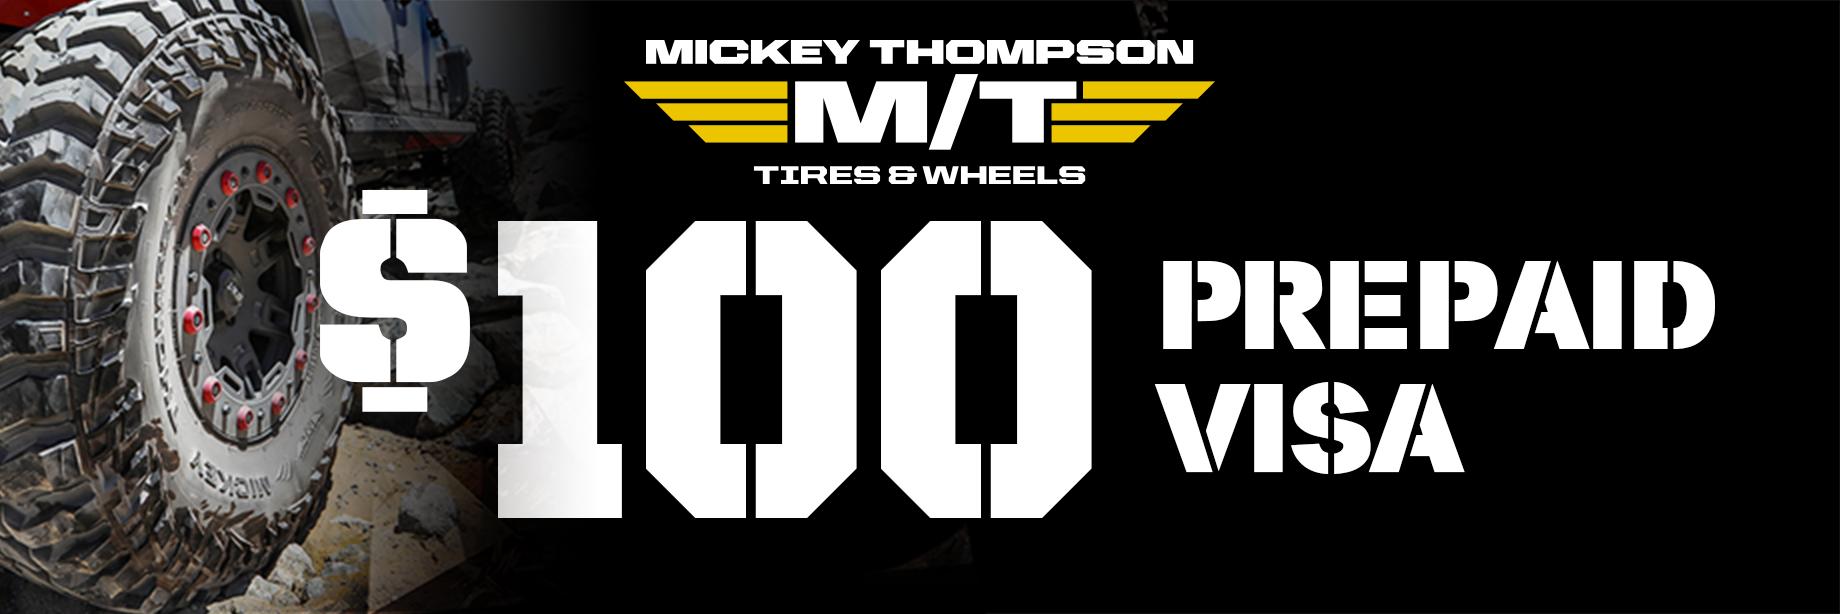 Mickey Thompson October 2020 tire rebate with Discount Tire Direct